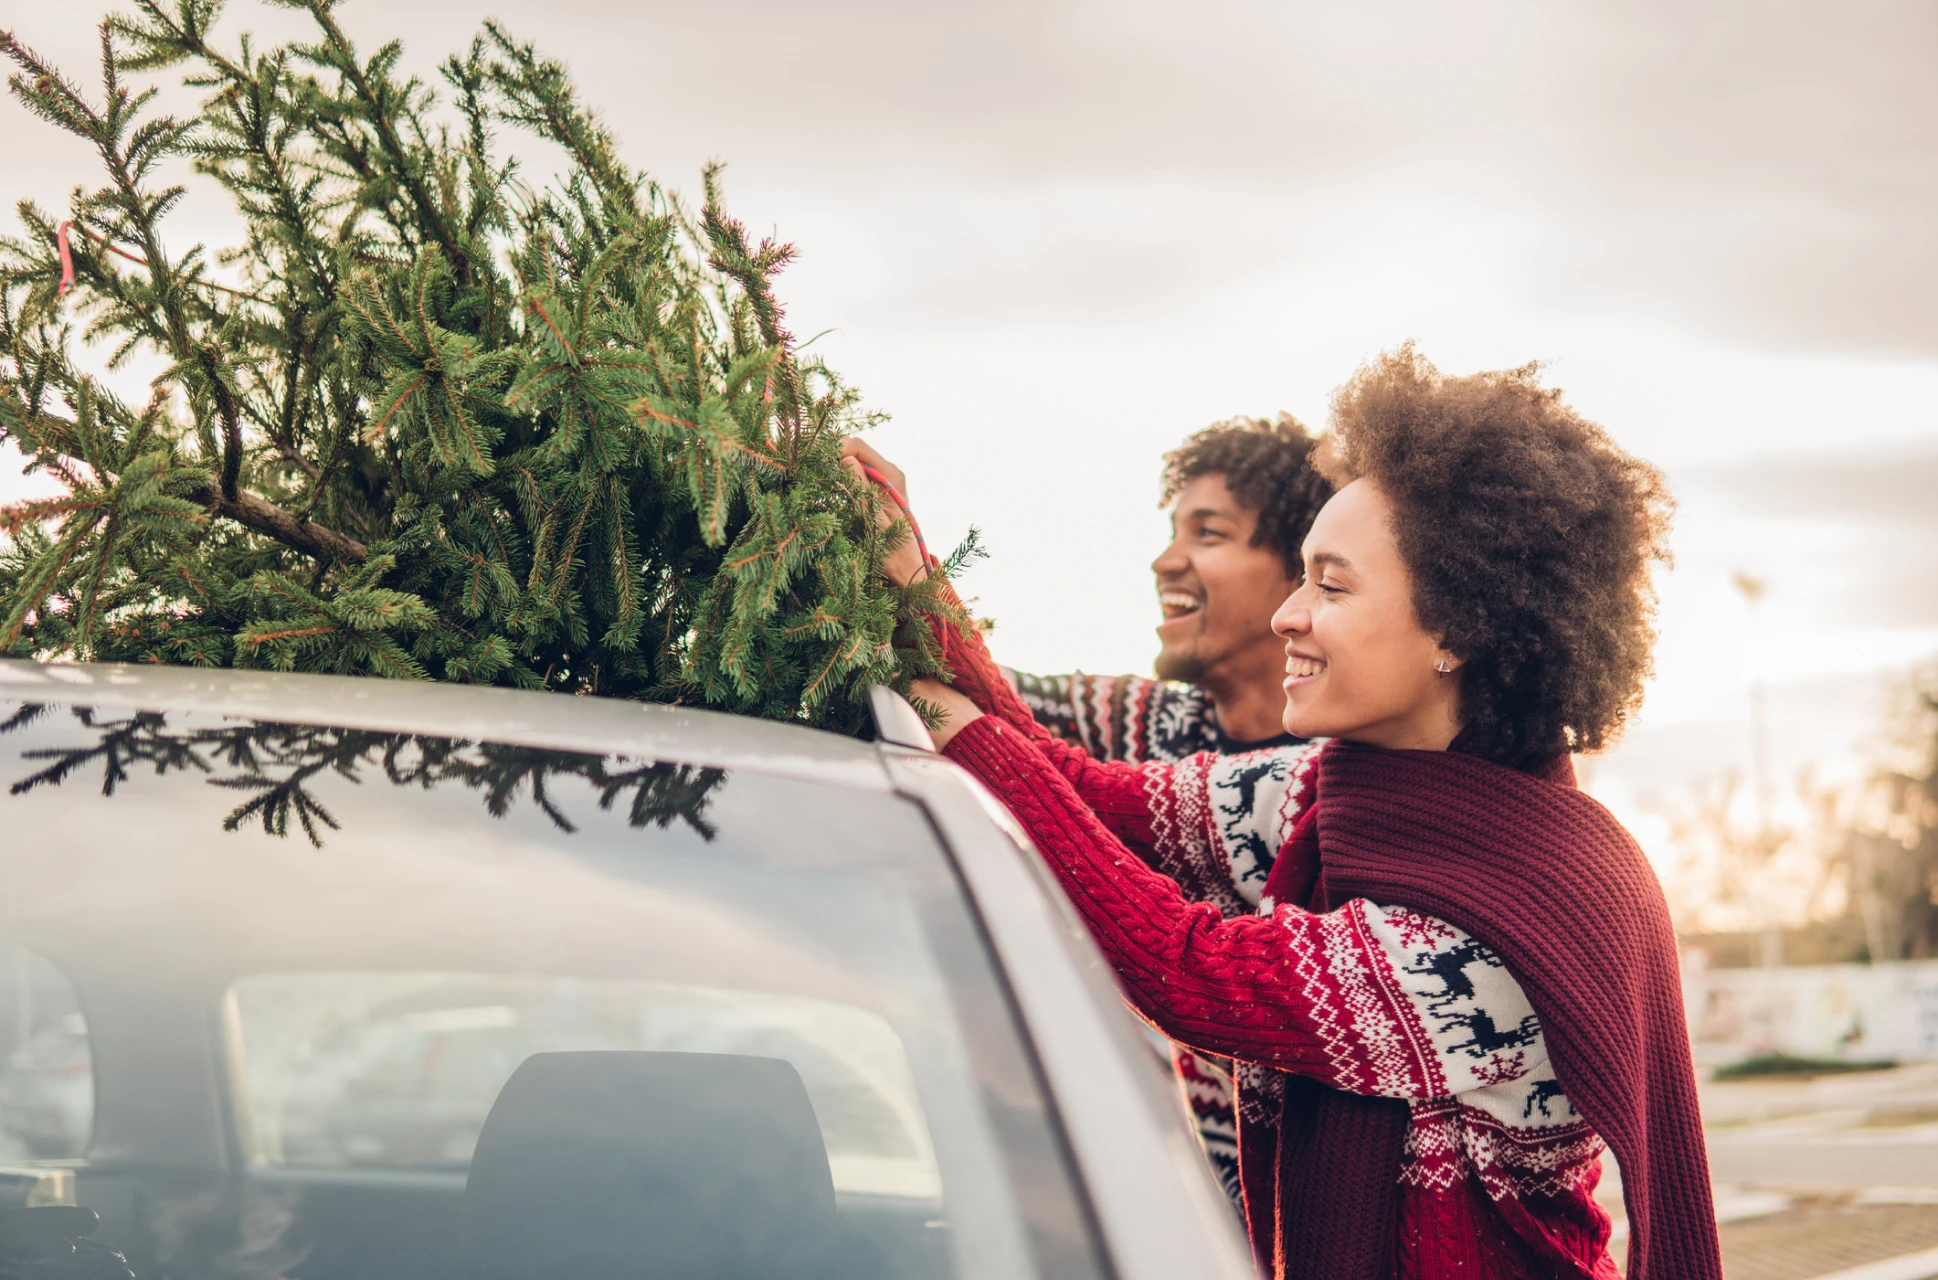 Mom and dad put Christmas tree on top of their car before traveling to see family for the holidays